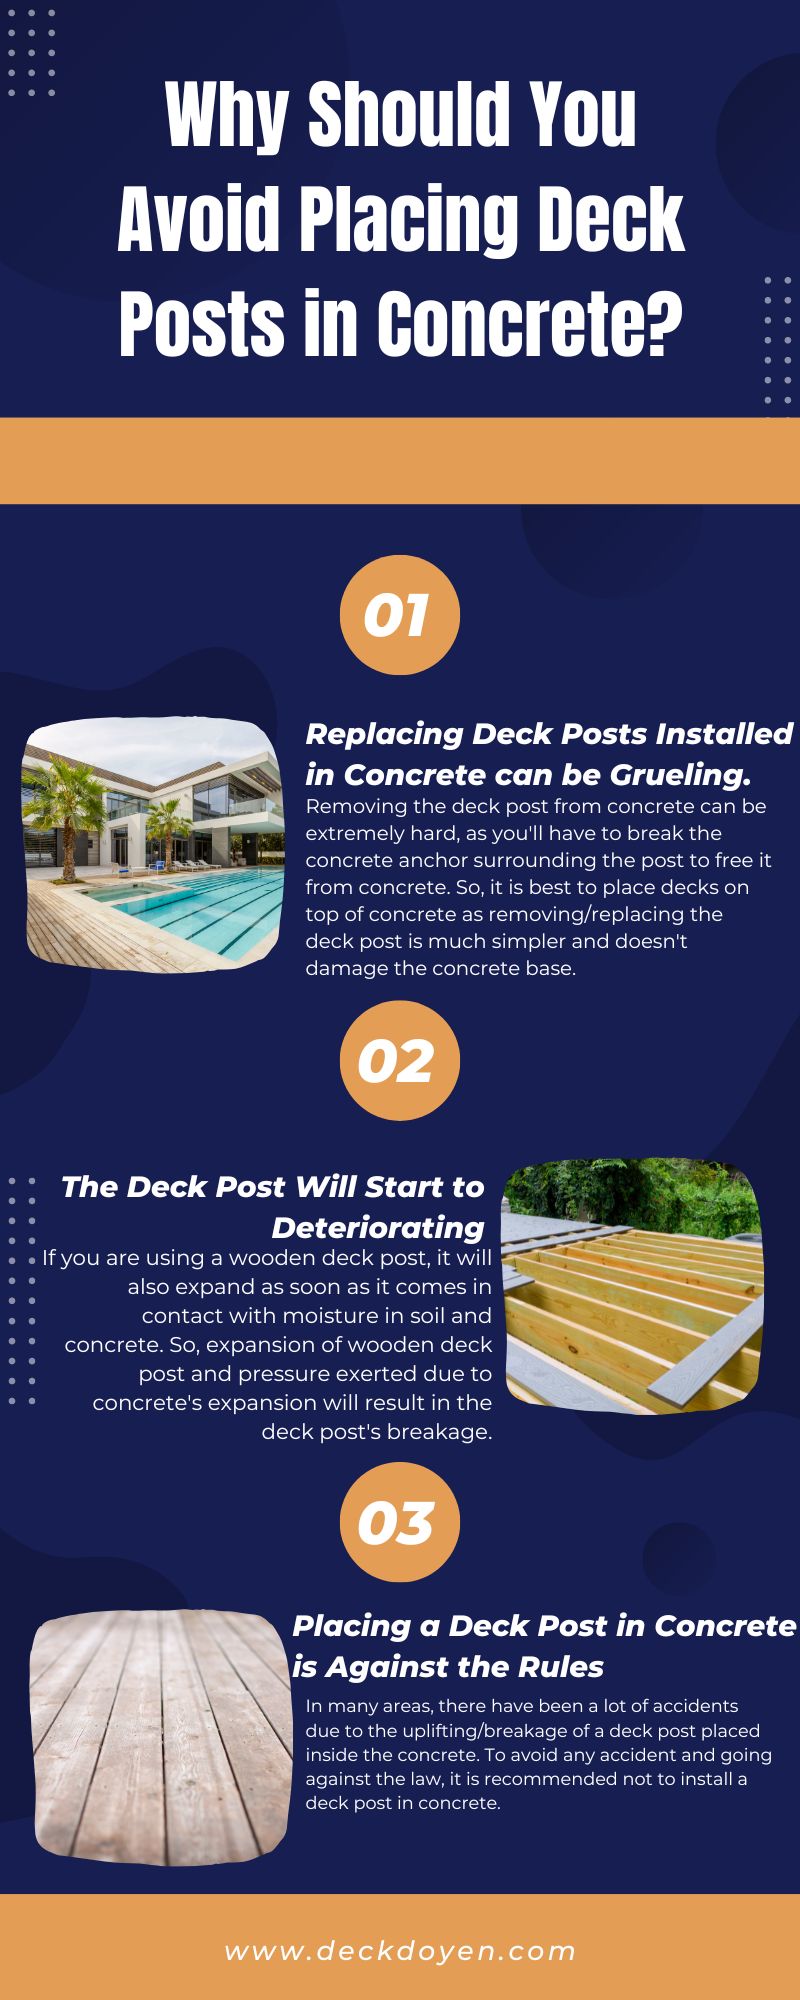 Why Should You Avoid Placing Deck Posts in Concrete?